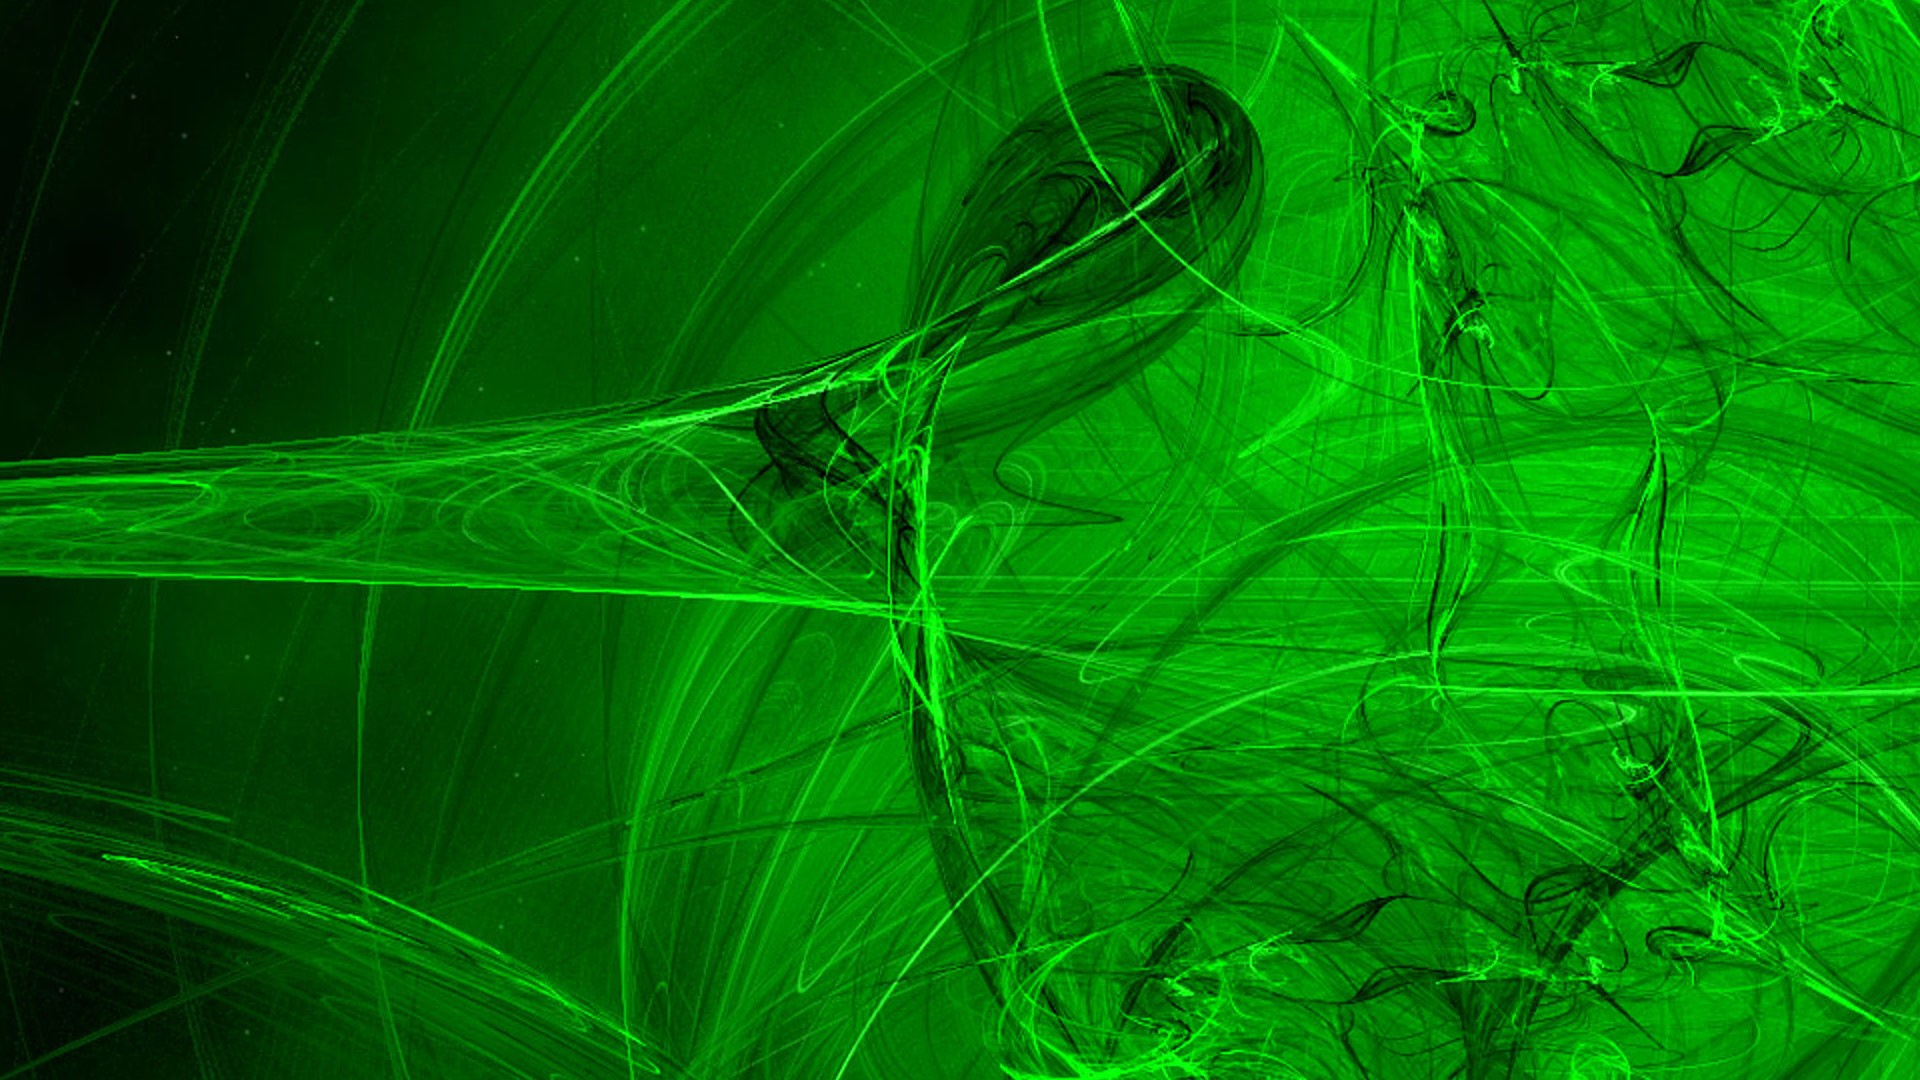 Green Neon Desktop Backgrounds with image resolution 1920x1080 pixel. You can make this wallpaper for your Desktop Computer Backgrounds, Mac Wallpapers, Android Lock screen or iPhone Screensavers